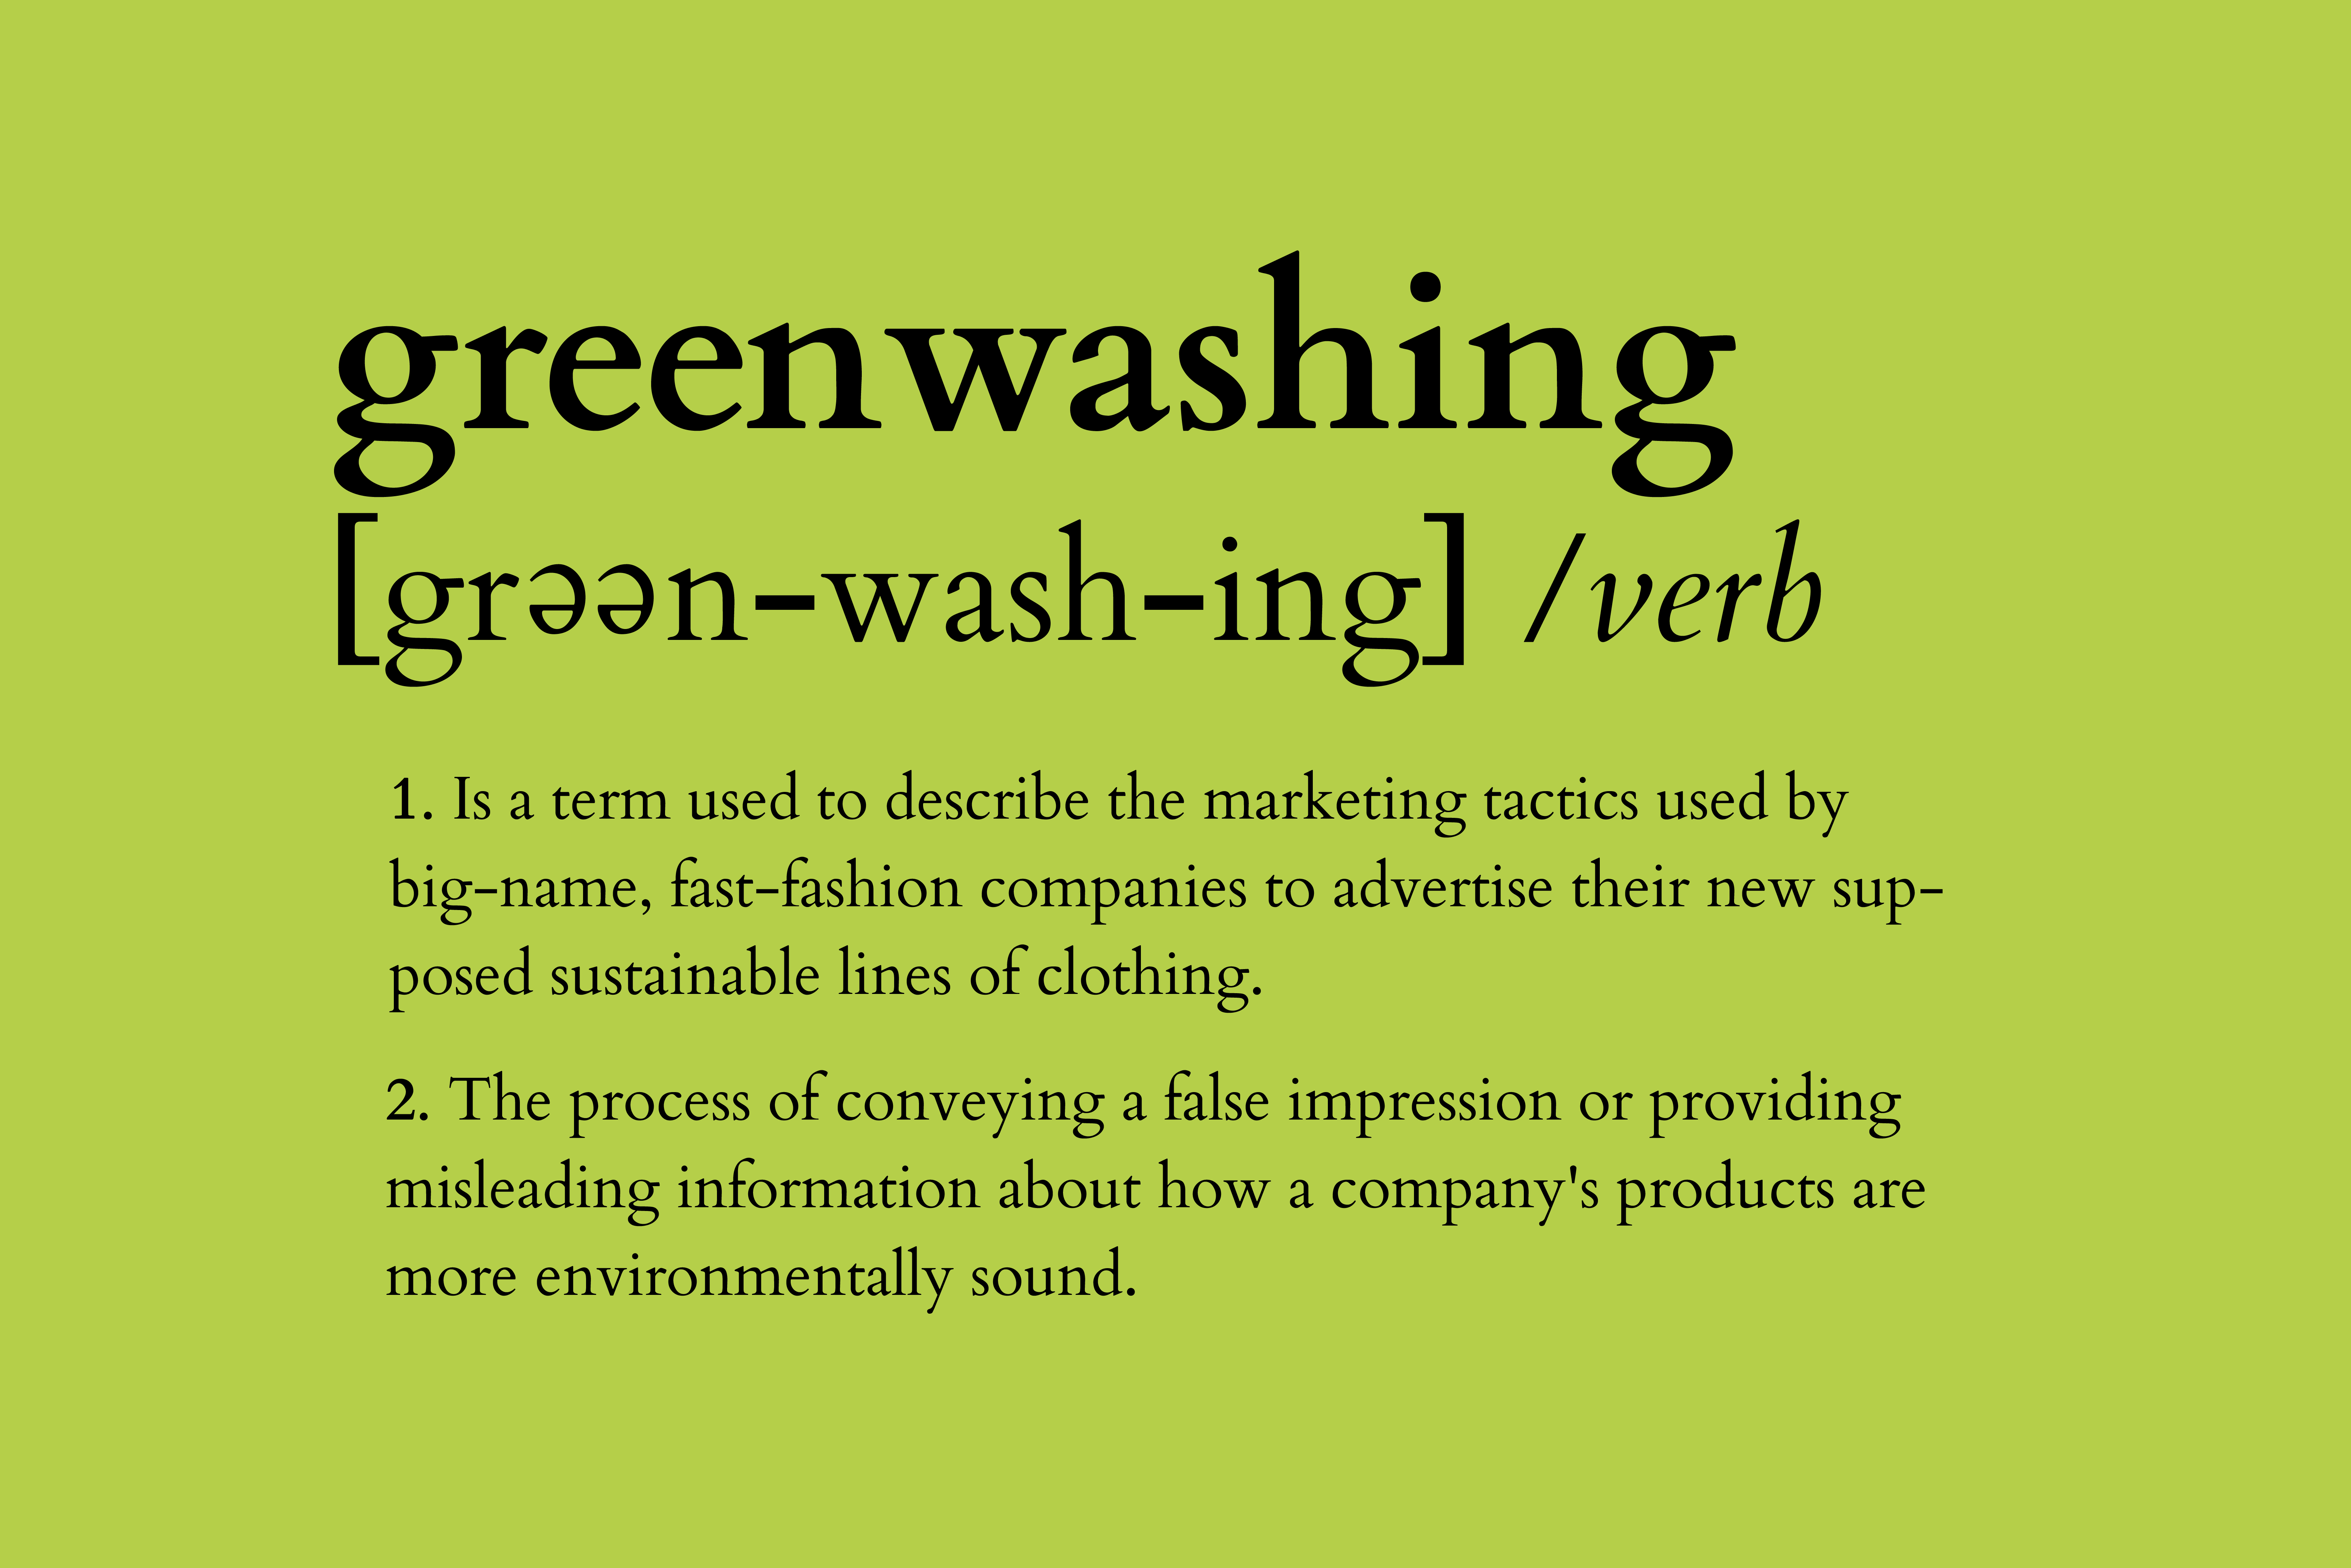 Greenwashing in the Luxury Goods Industry